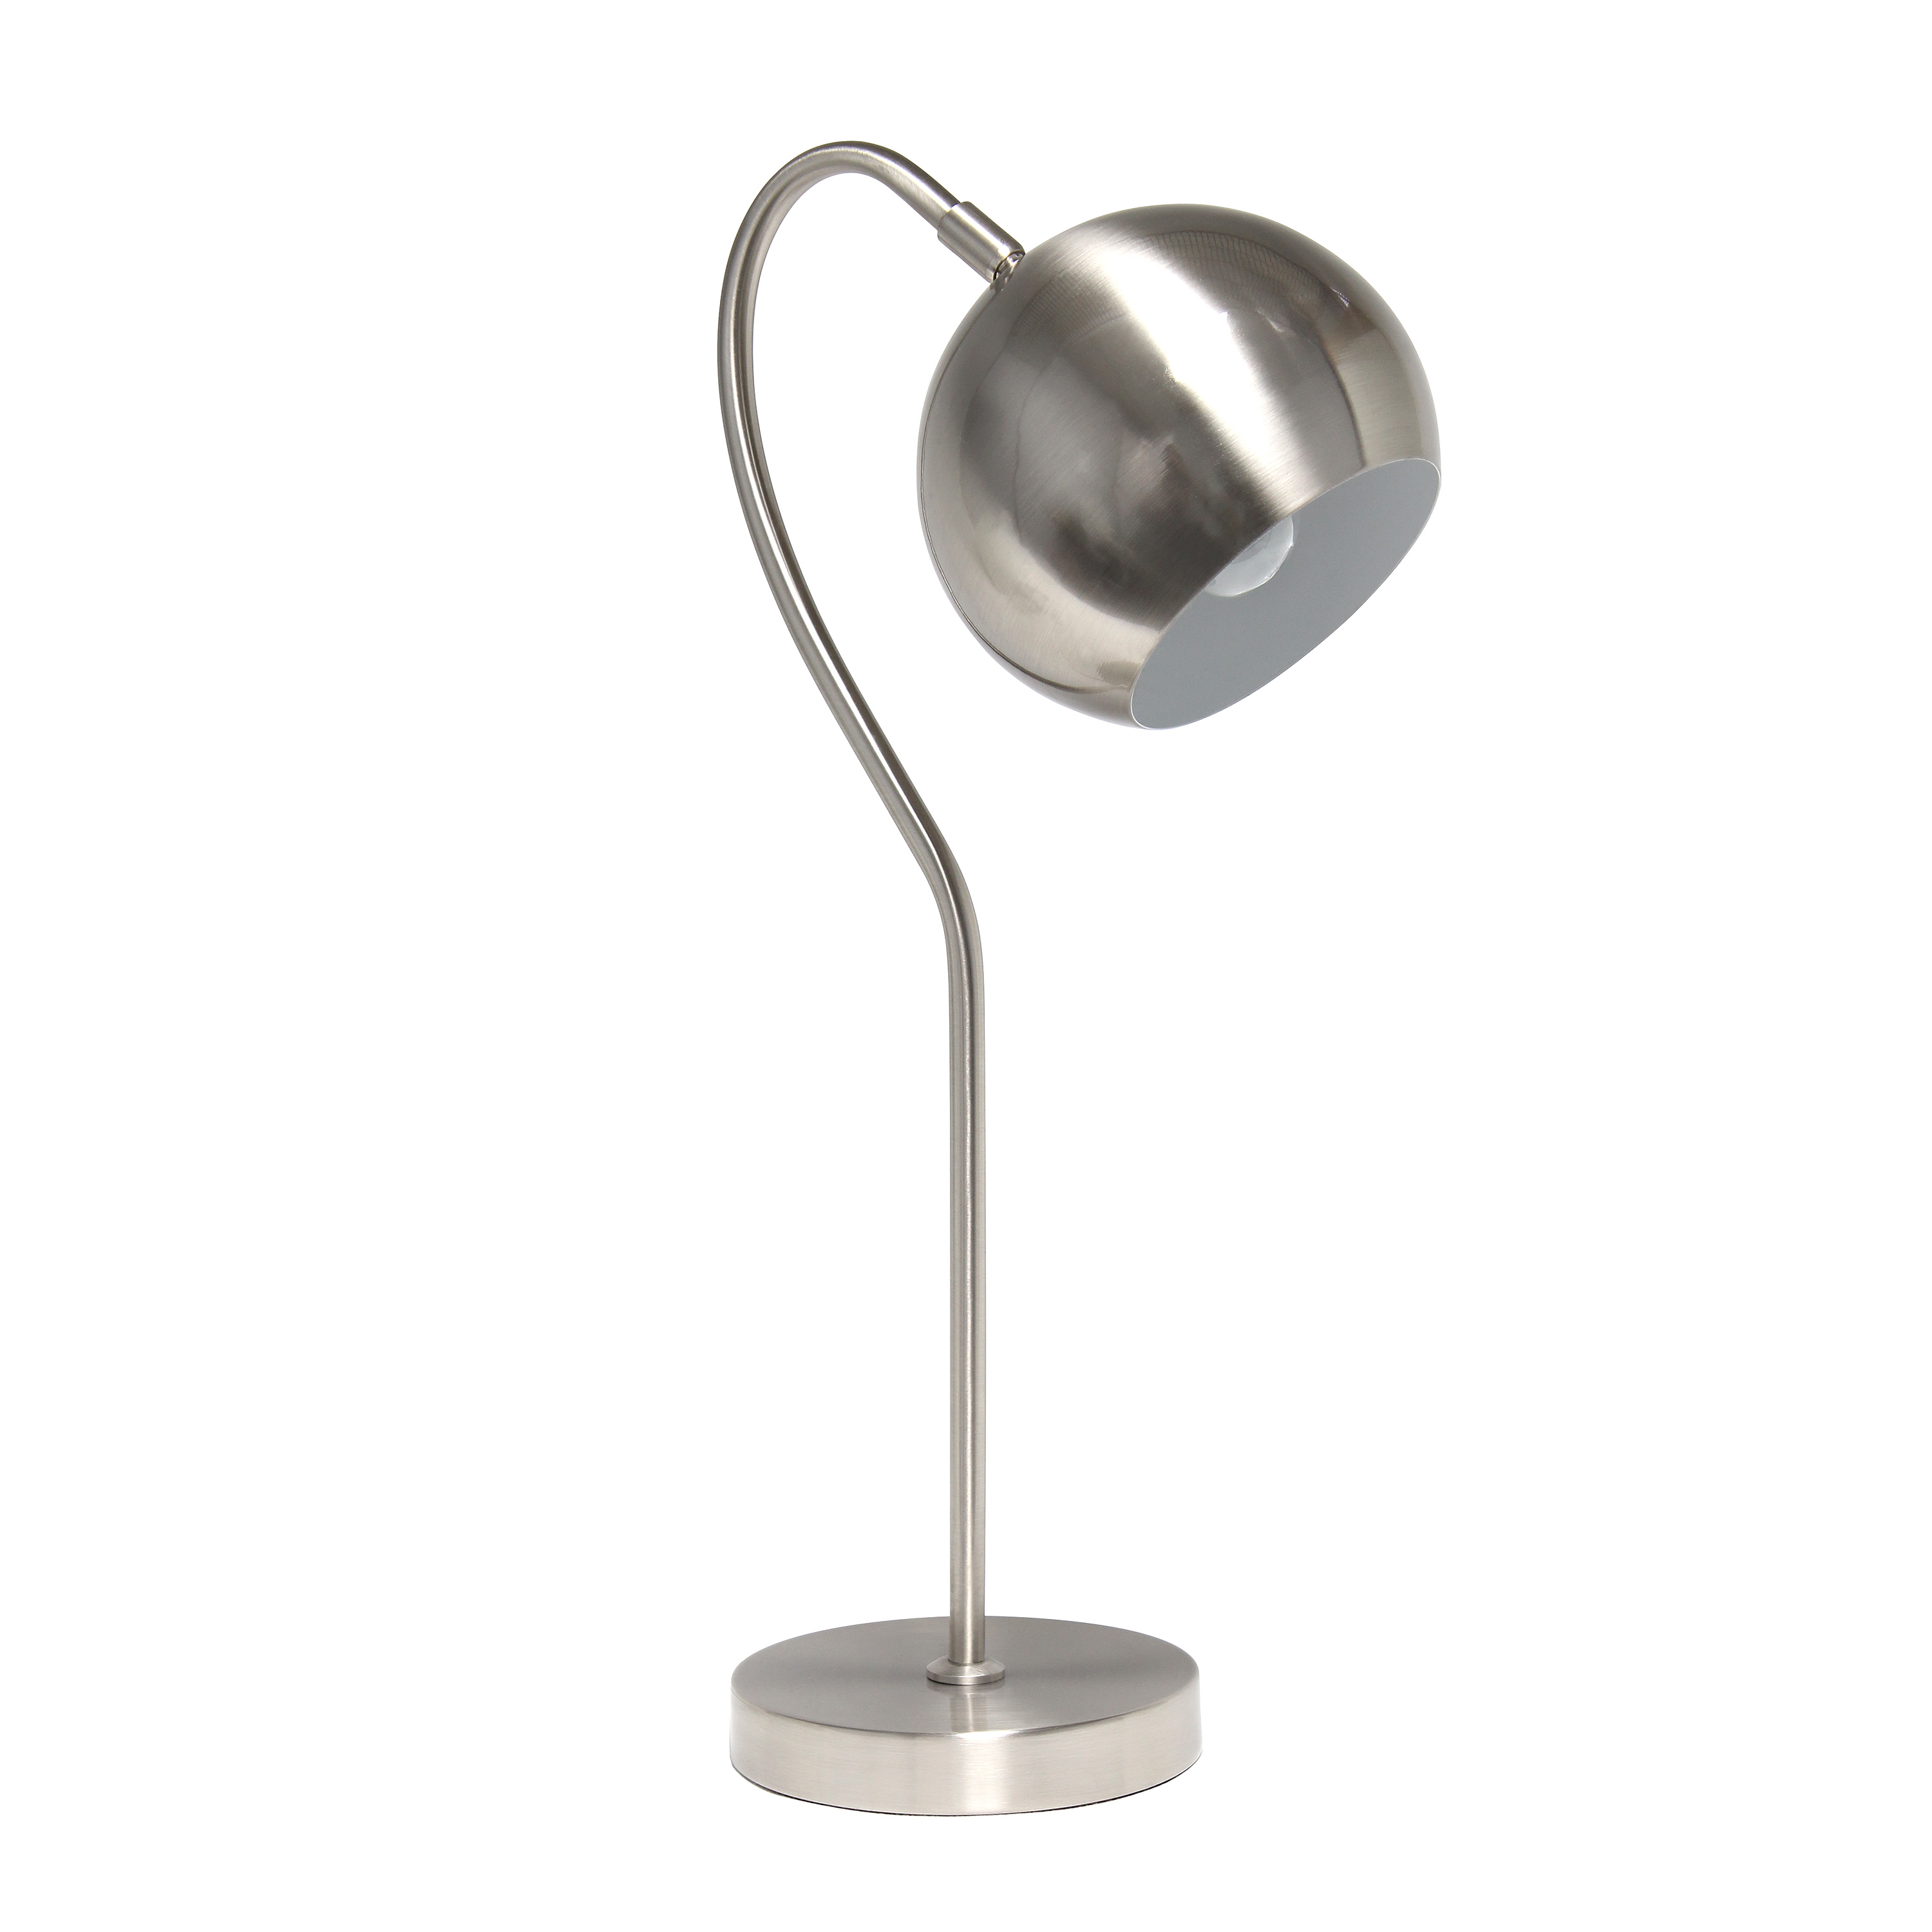 Lalia Home Mid Century Curved Table Lamp with Dome Shade, Brushed Nickel